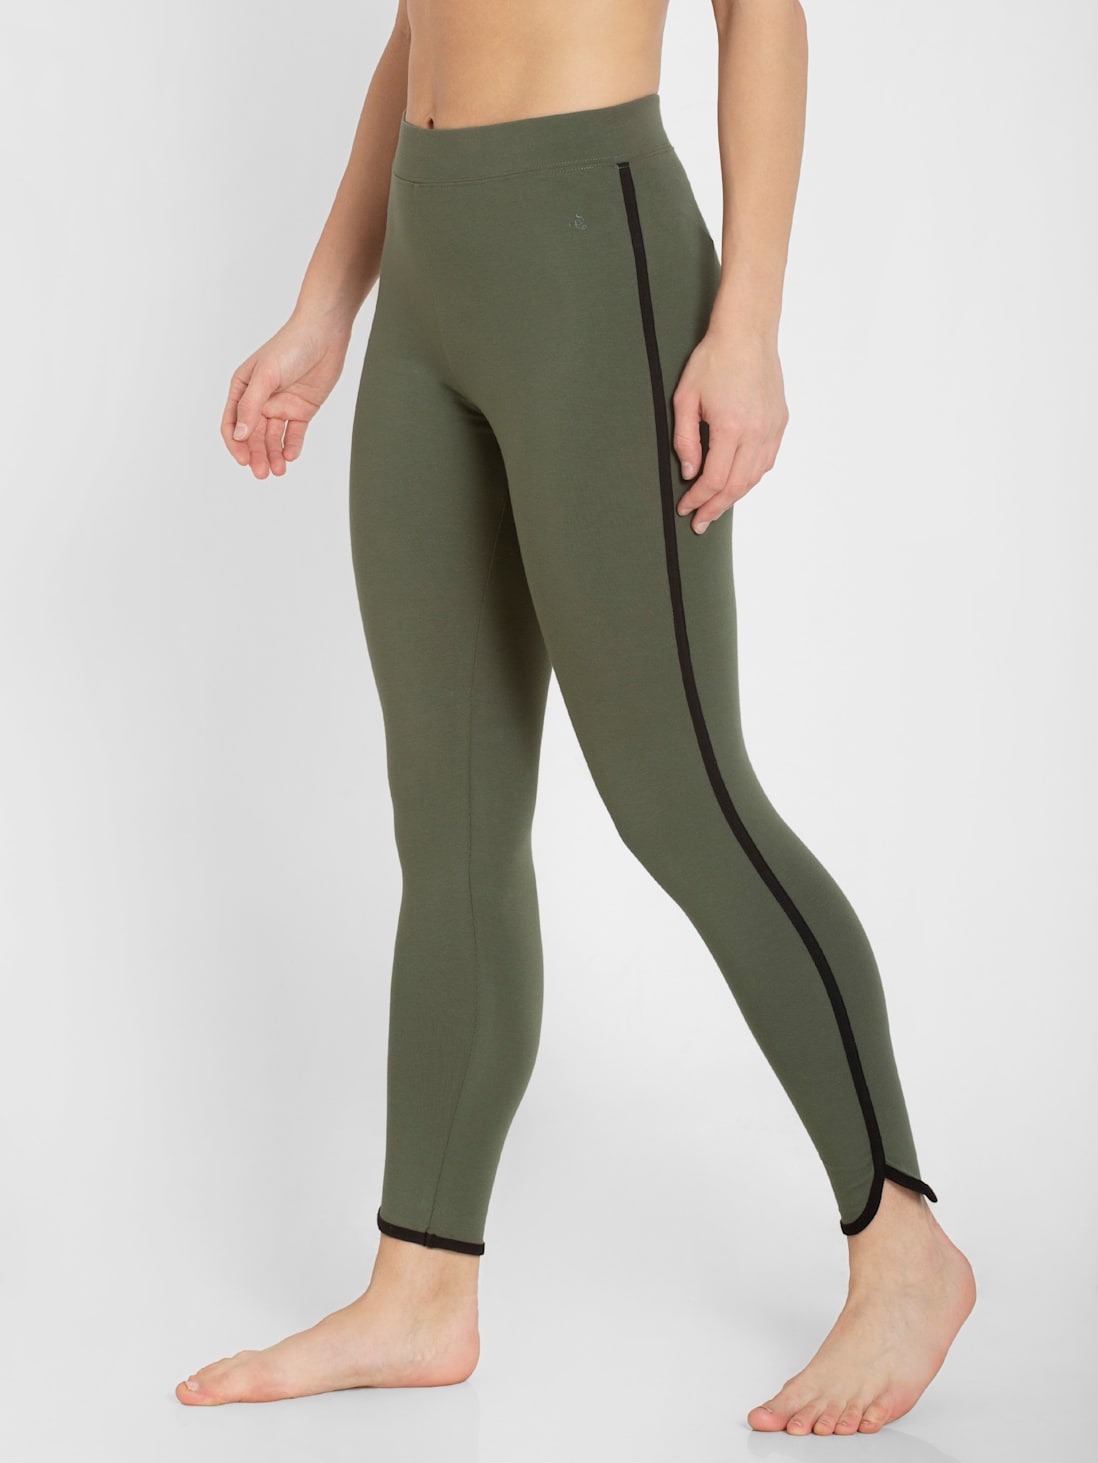 LADIES GYM PANTS BREZEL-PS-BLK, Casual Wear, Slim Fit at Rs 195/piece in  New Delhi